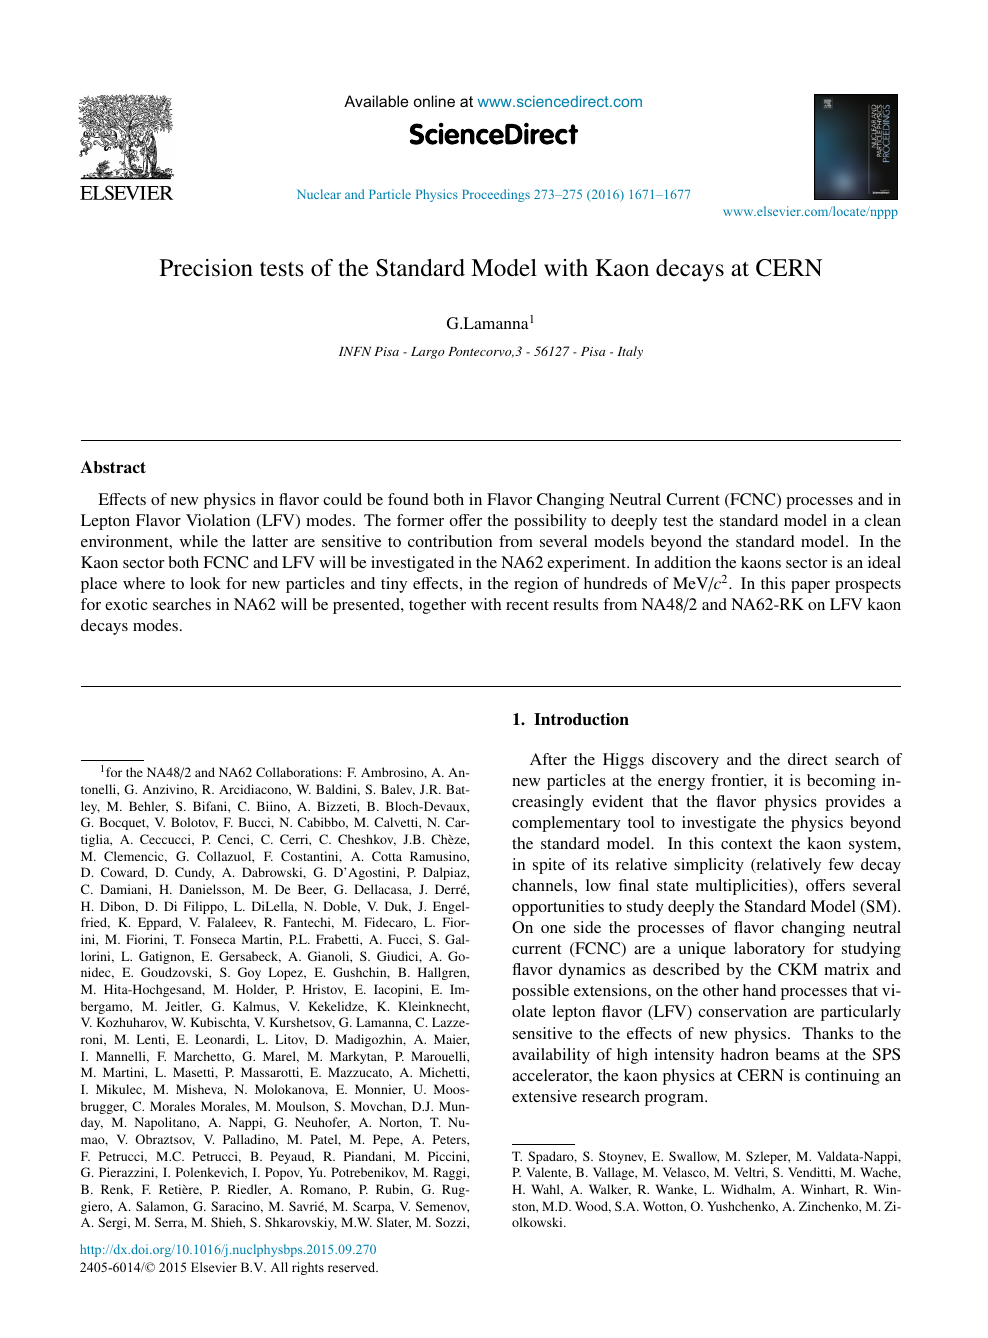 Precision Tests Of The Standard Model With Kaon Decays At Cern Topic Of Research Paper In Physical Sciences Download Scholarly Article Pdf And Read For Free On Cyberleninka Open Science Hub